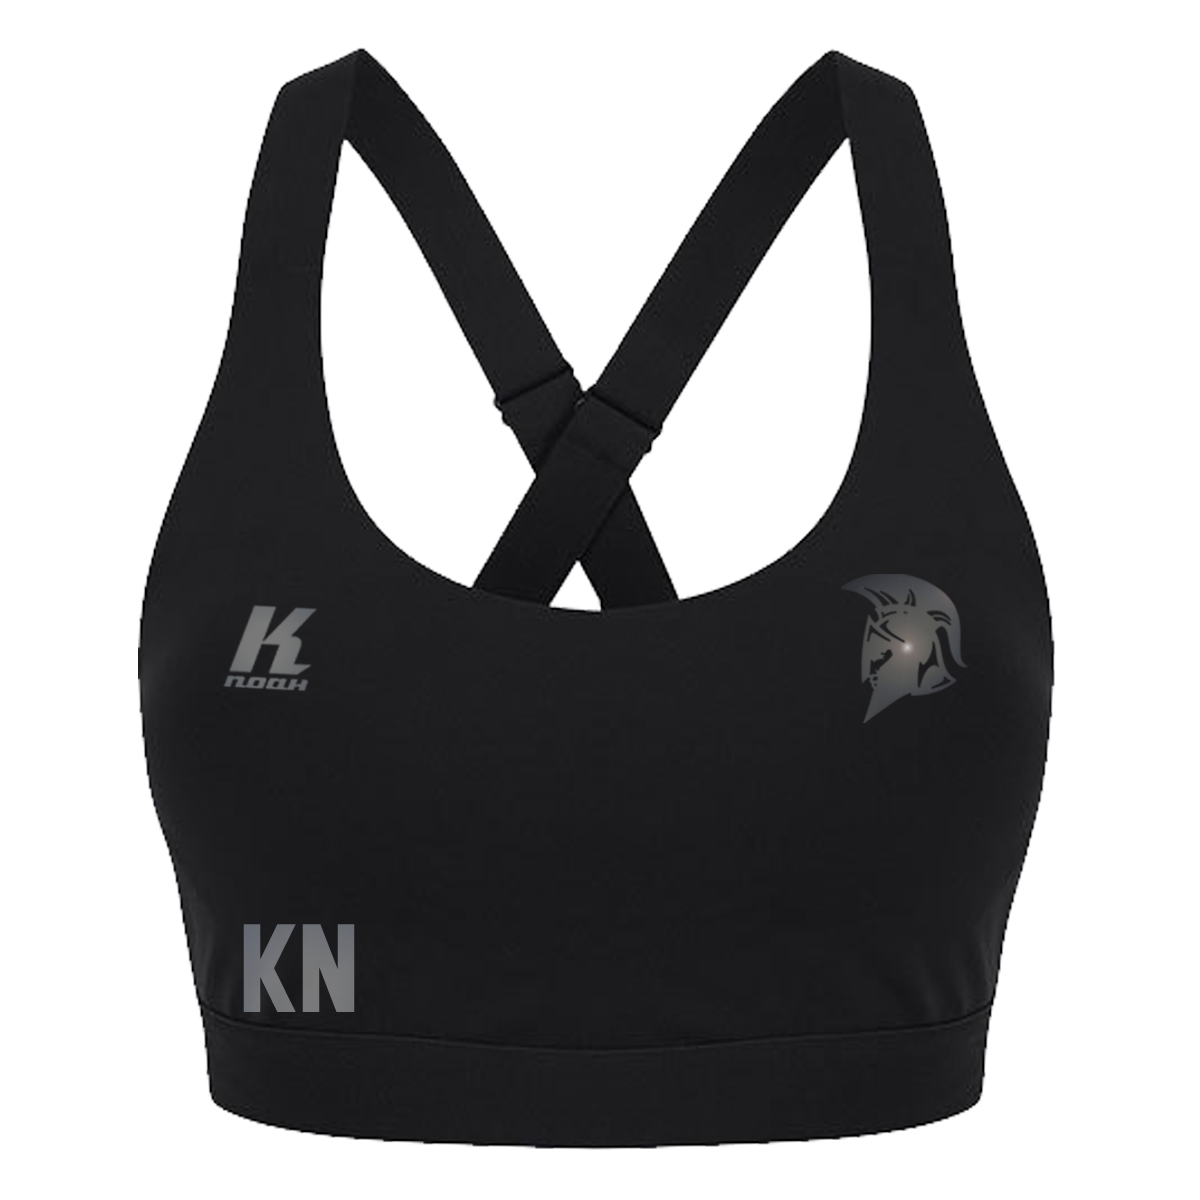 Spartans "Blackline" Womens Impact Core Bra TL371 with Initials/Playernumber